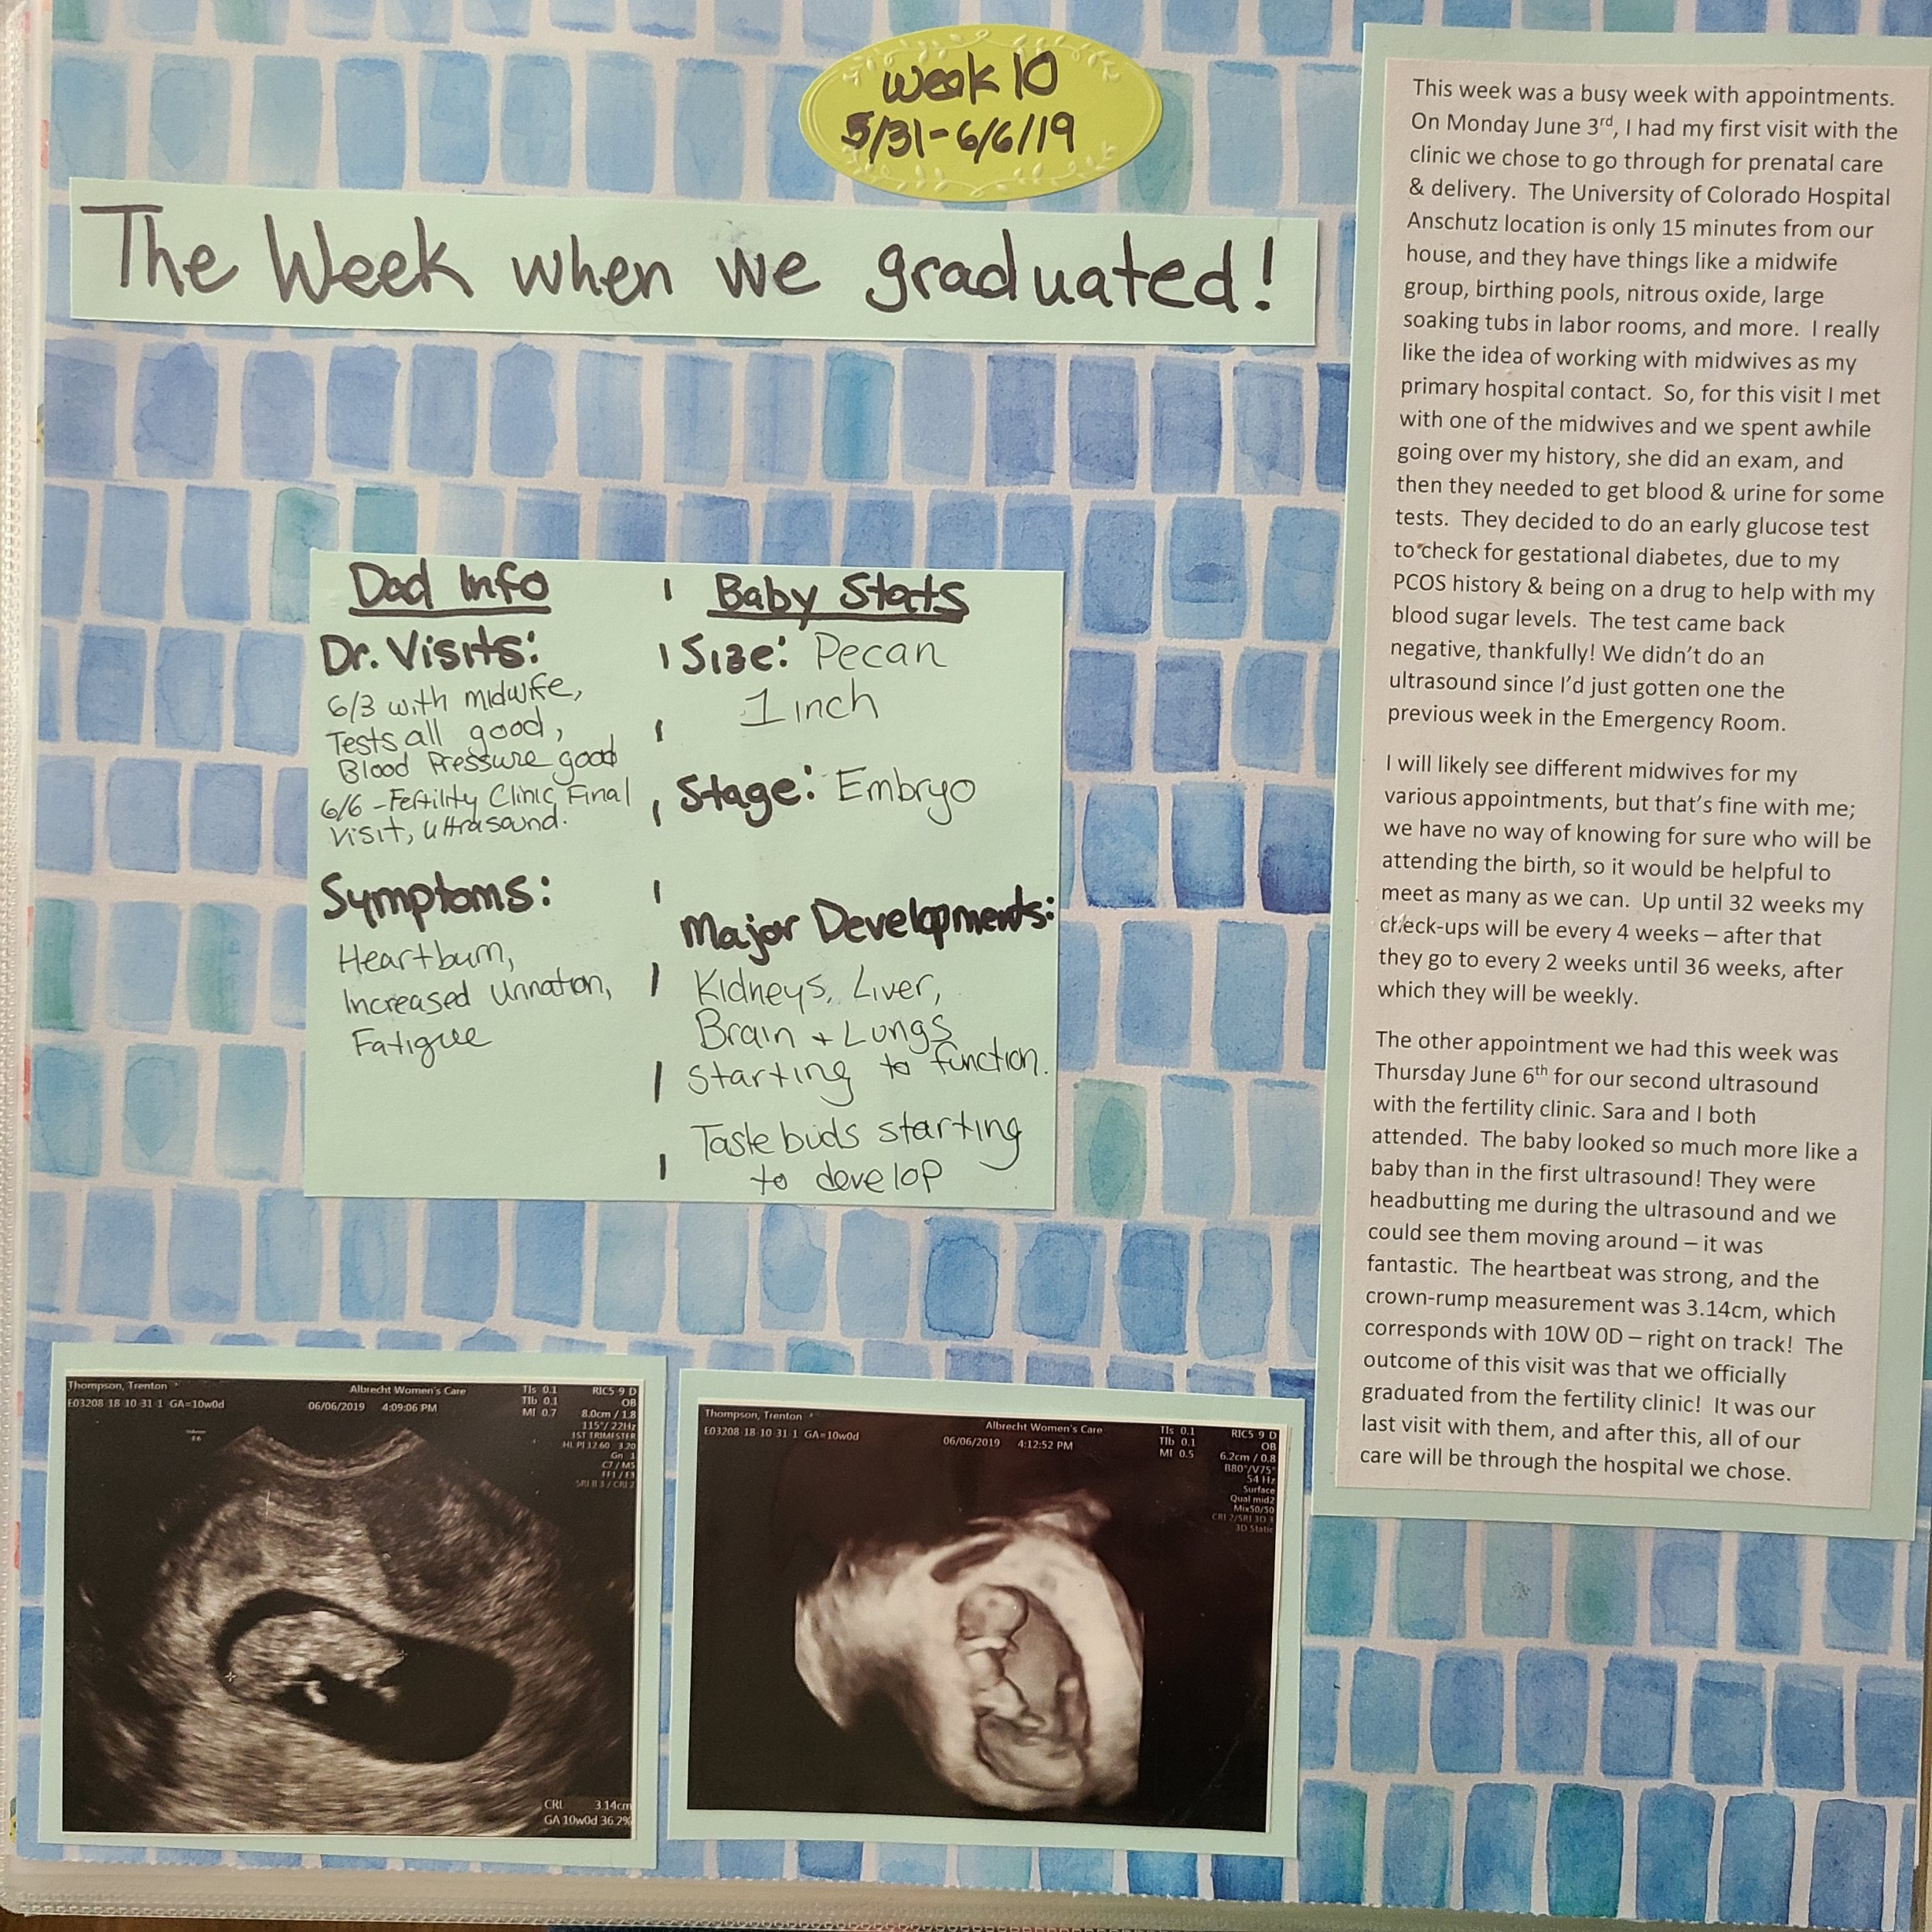 week 10 scrapbook page, with a background of small blue watercolor rectangles neatly arranged.  The page includes 2 ultrasound pictures, one 2D image showing an embryo bumping its head against the uterine wall, and a second 3-D image of the embryo where  its arms, legs, head and belly are all visible.